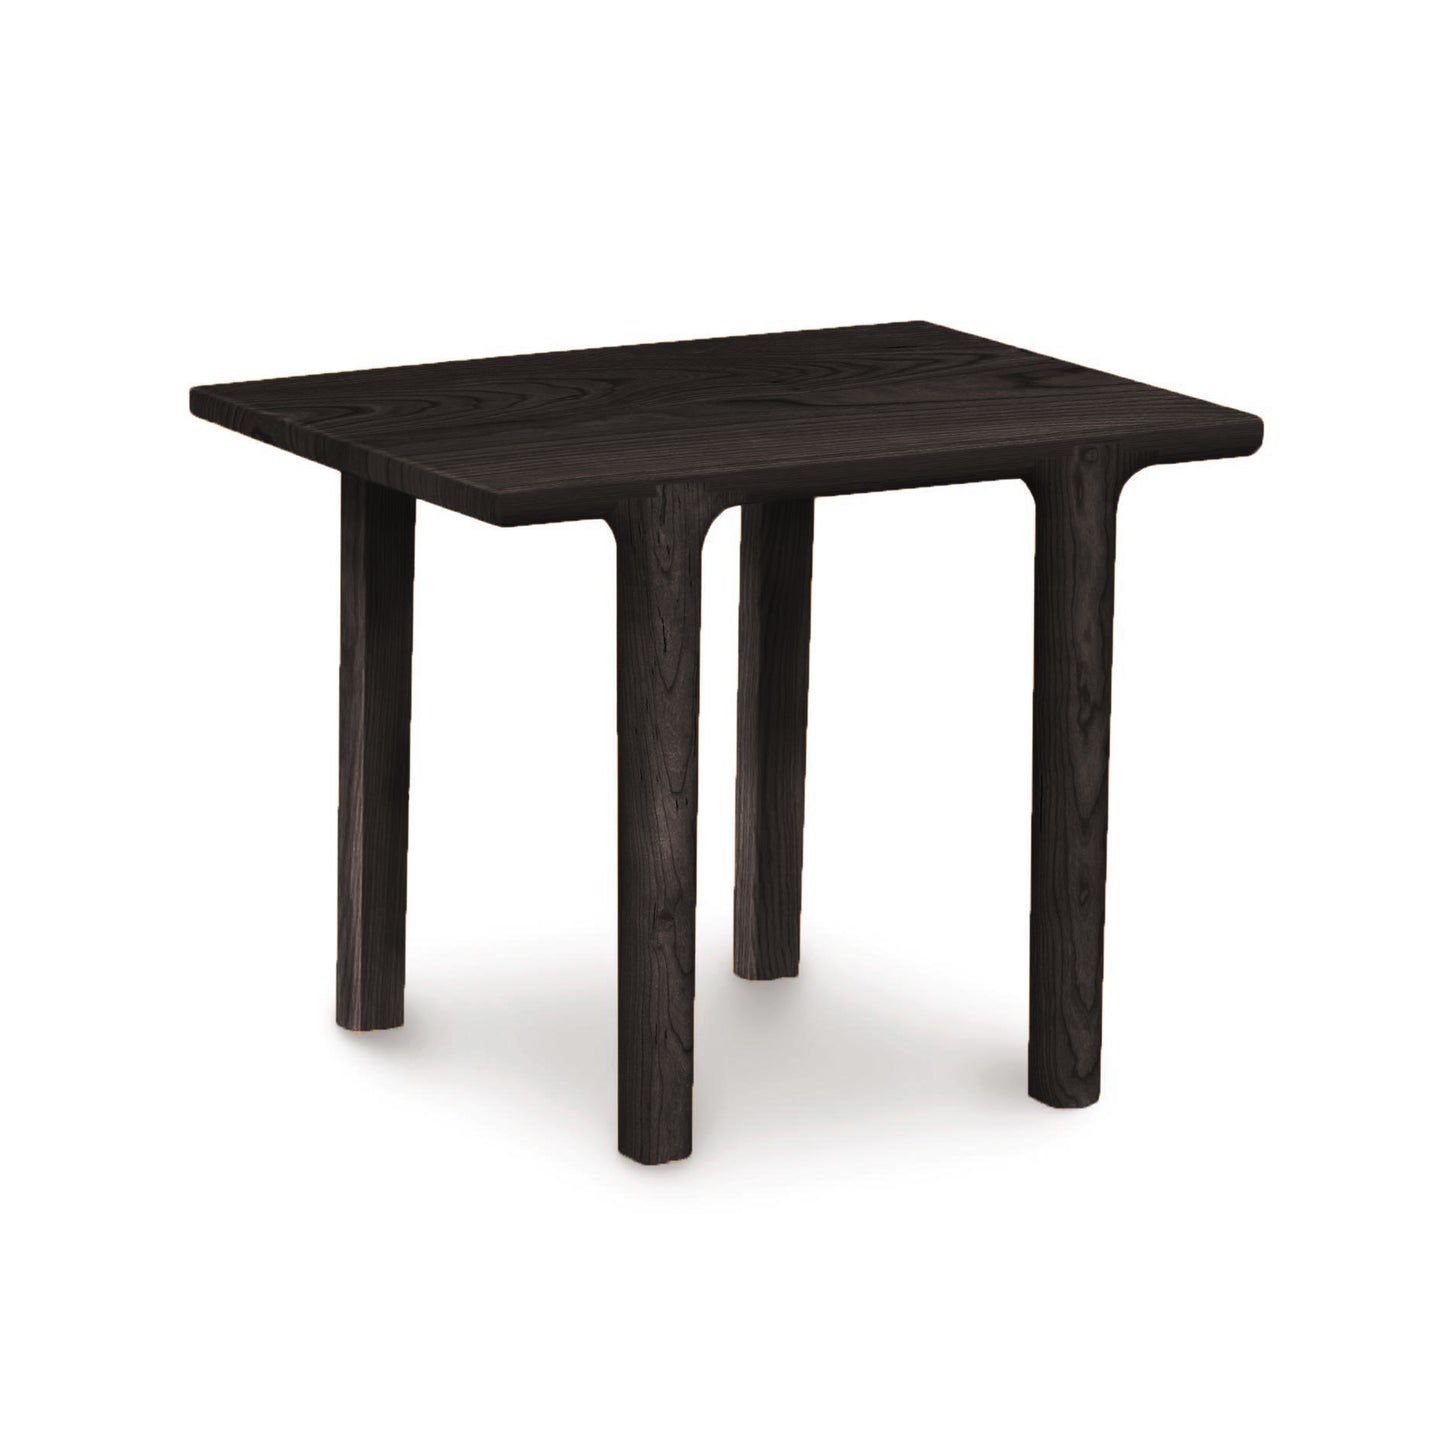 A modern Copeland Furniture Sierra Rectangular End Table on a white background.